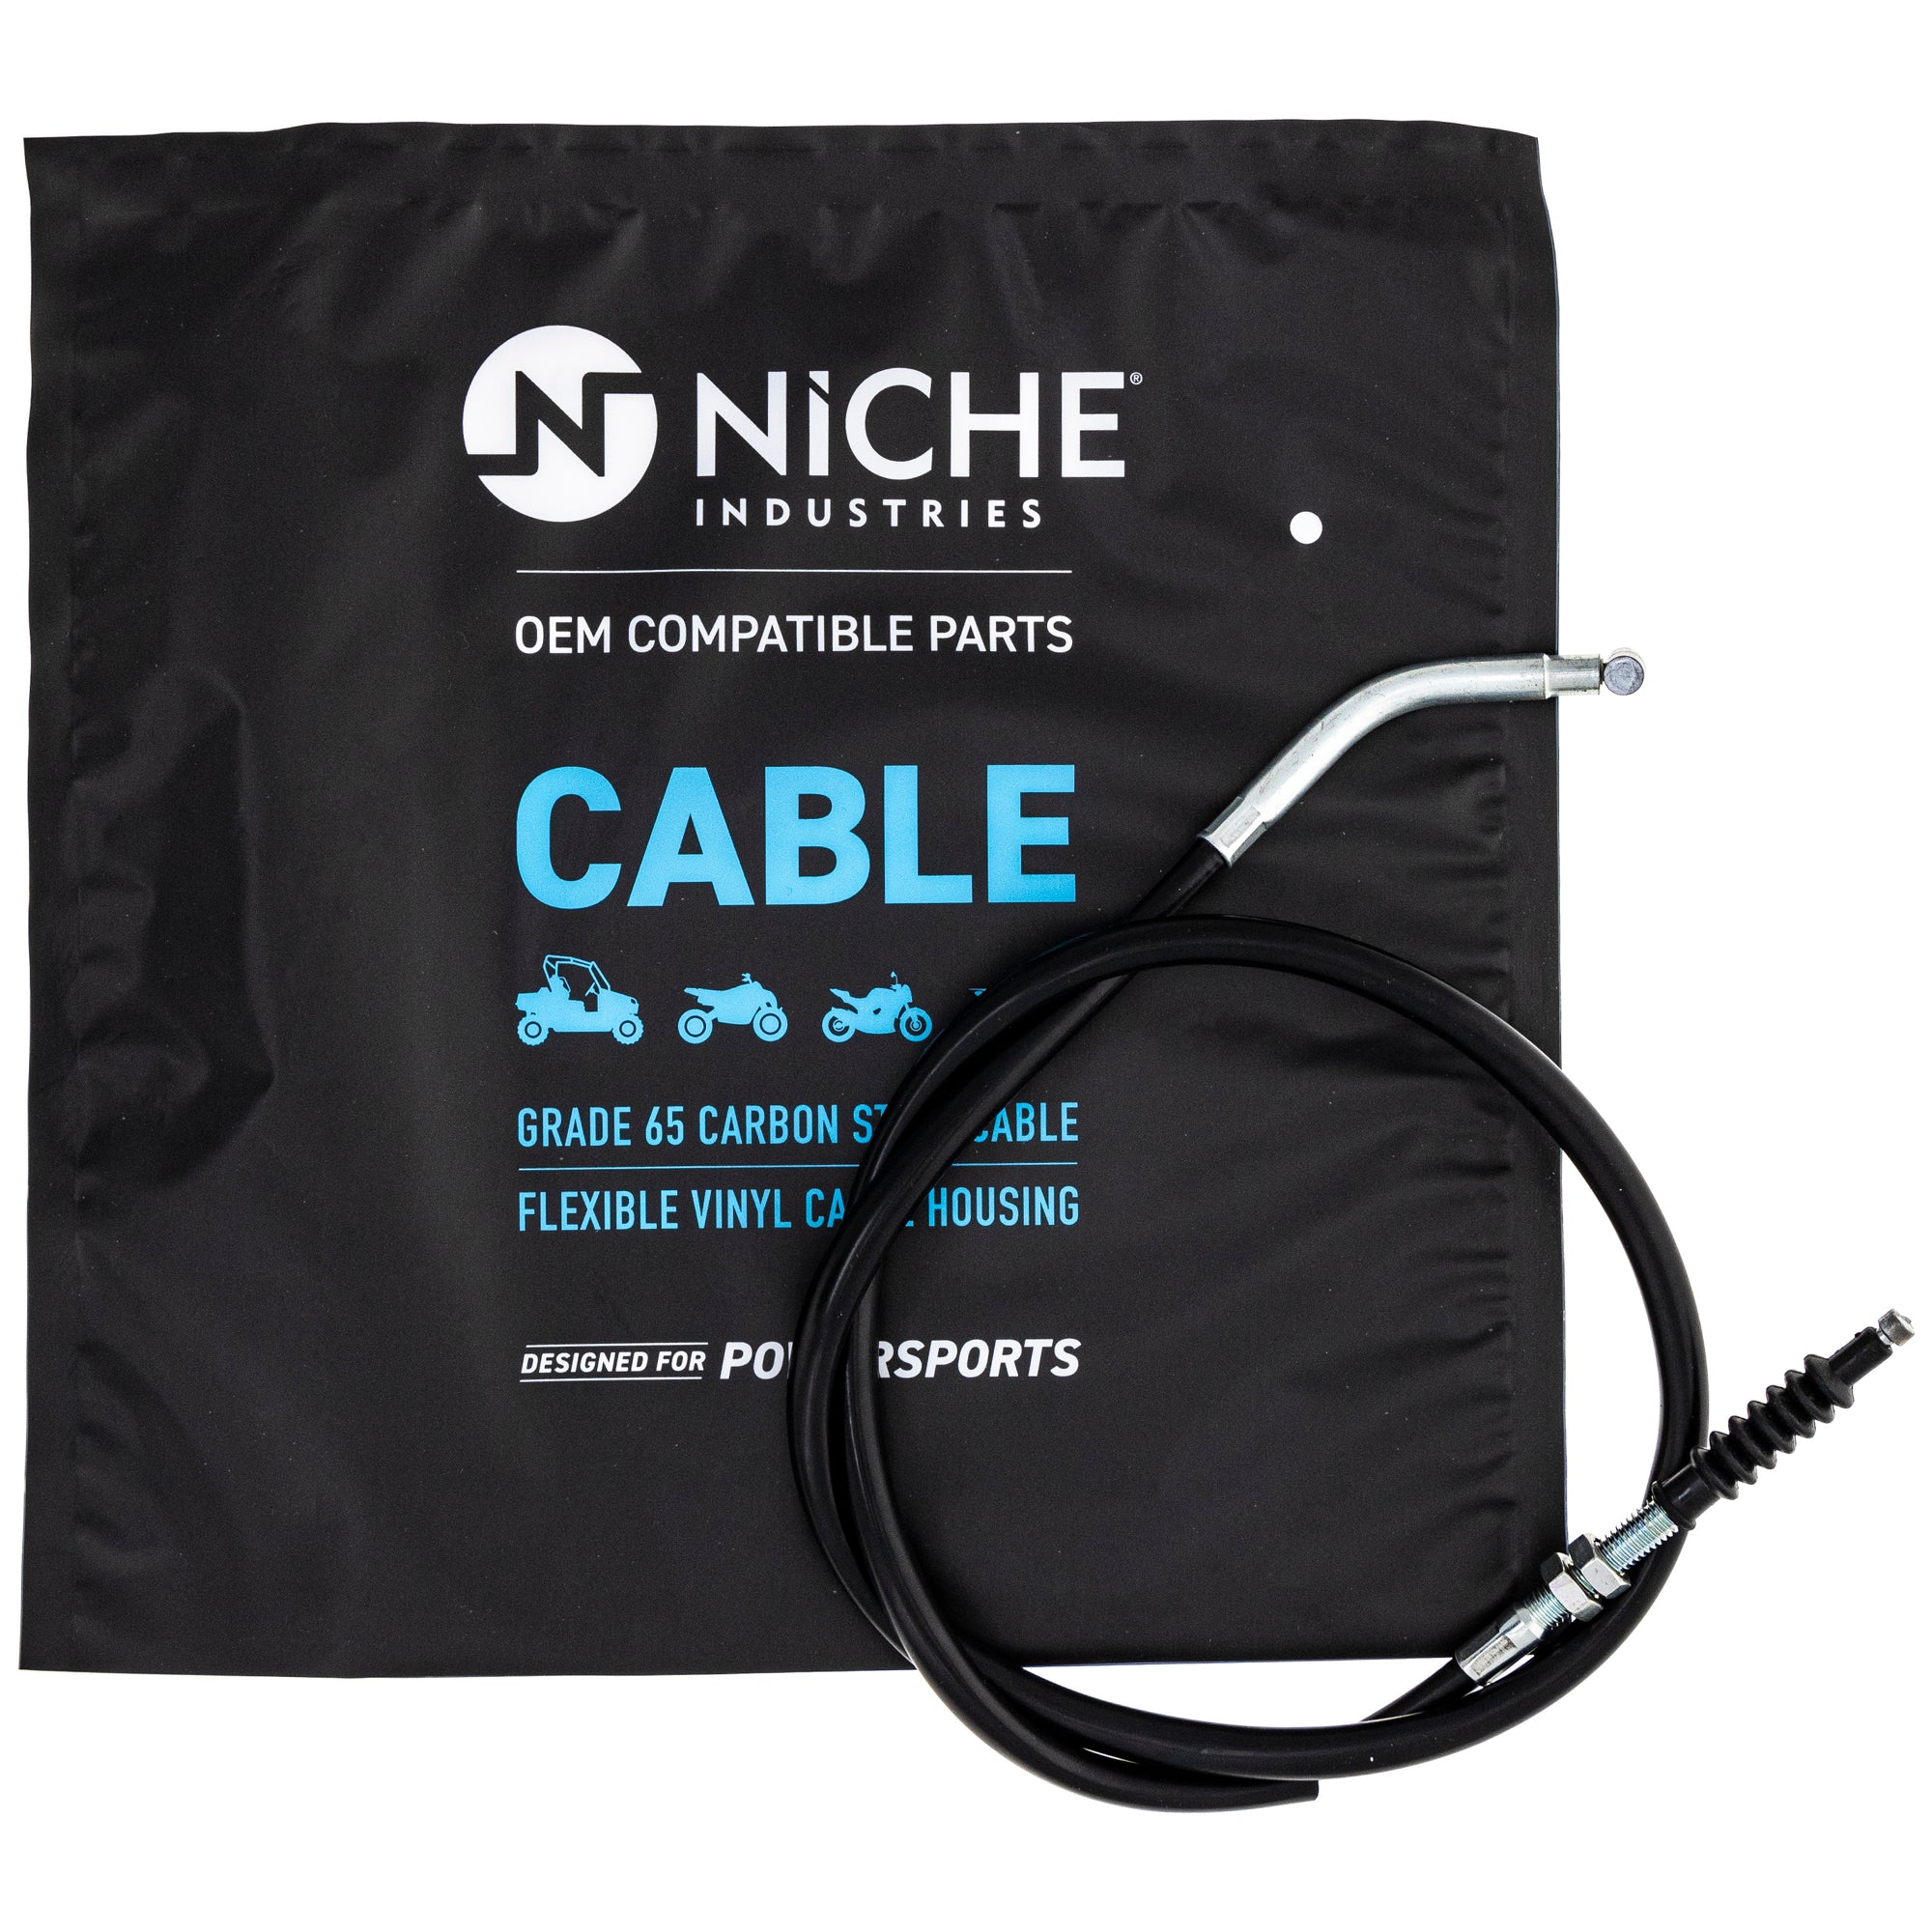 NICHE 519-CCB2779L Clutch Cable for zOTHER Ninja GPz305